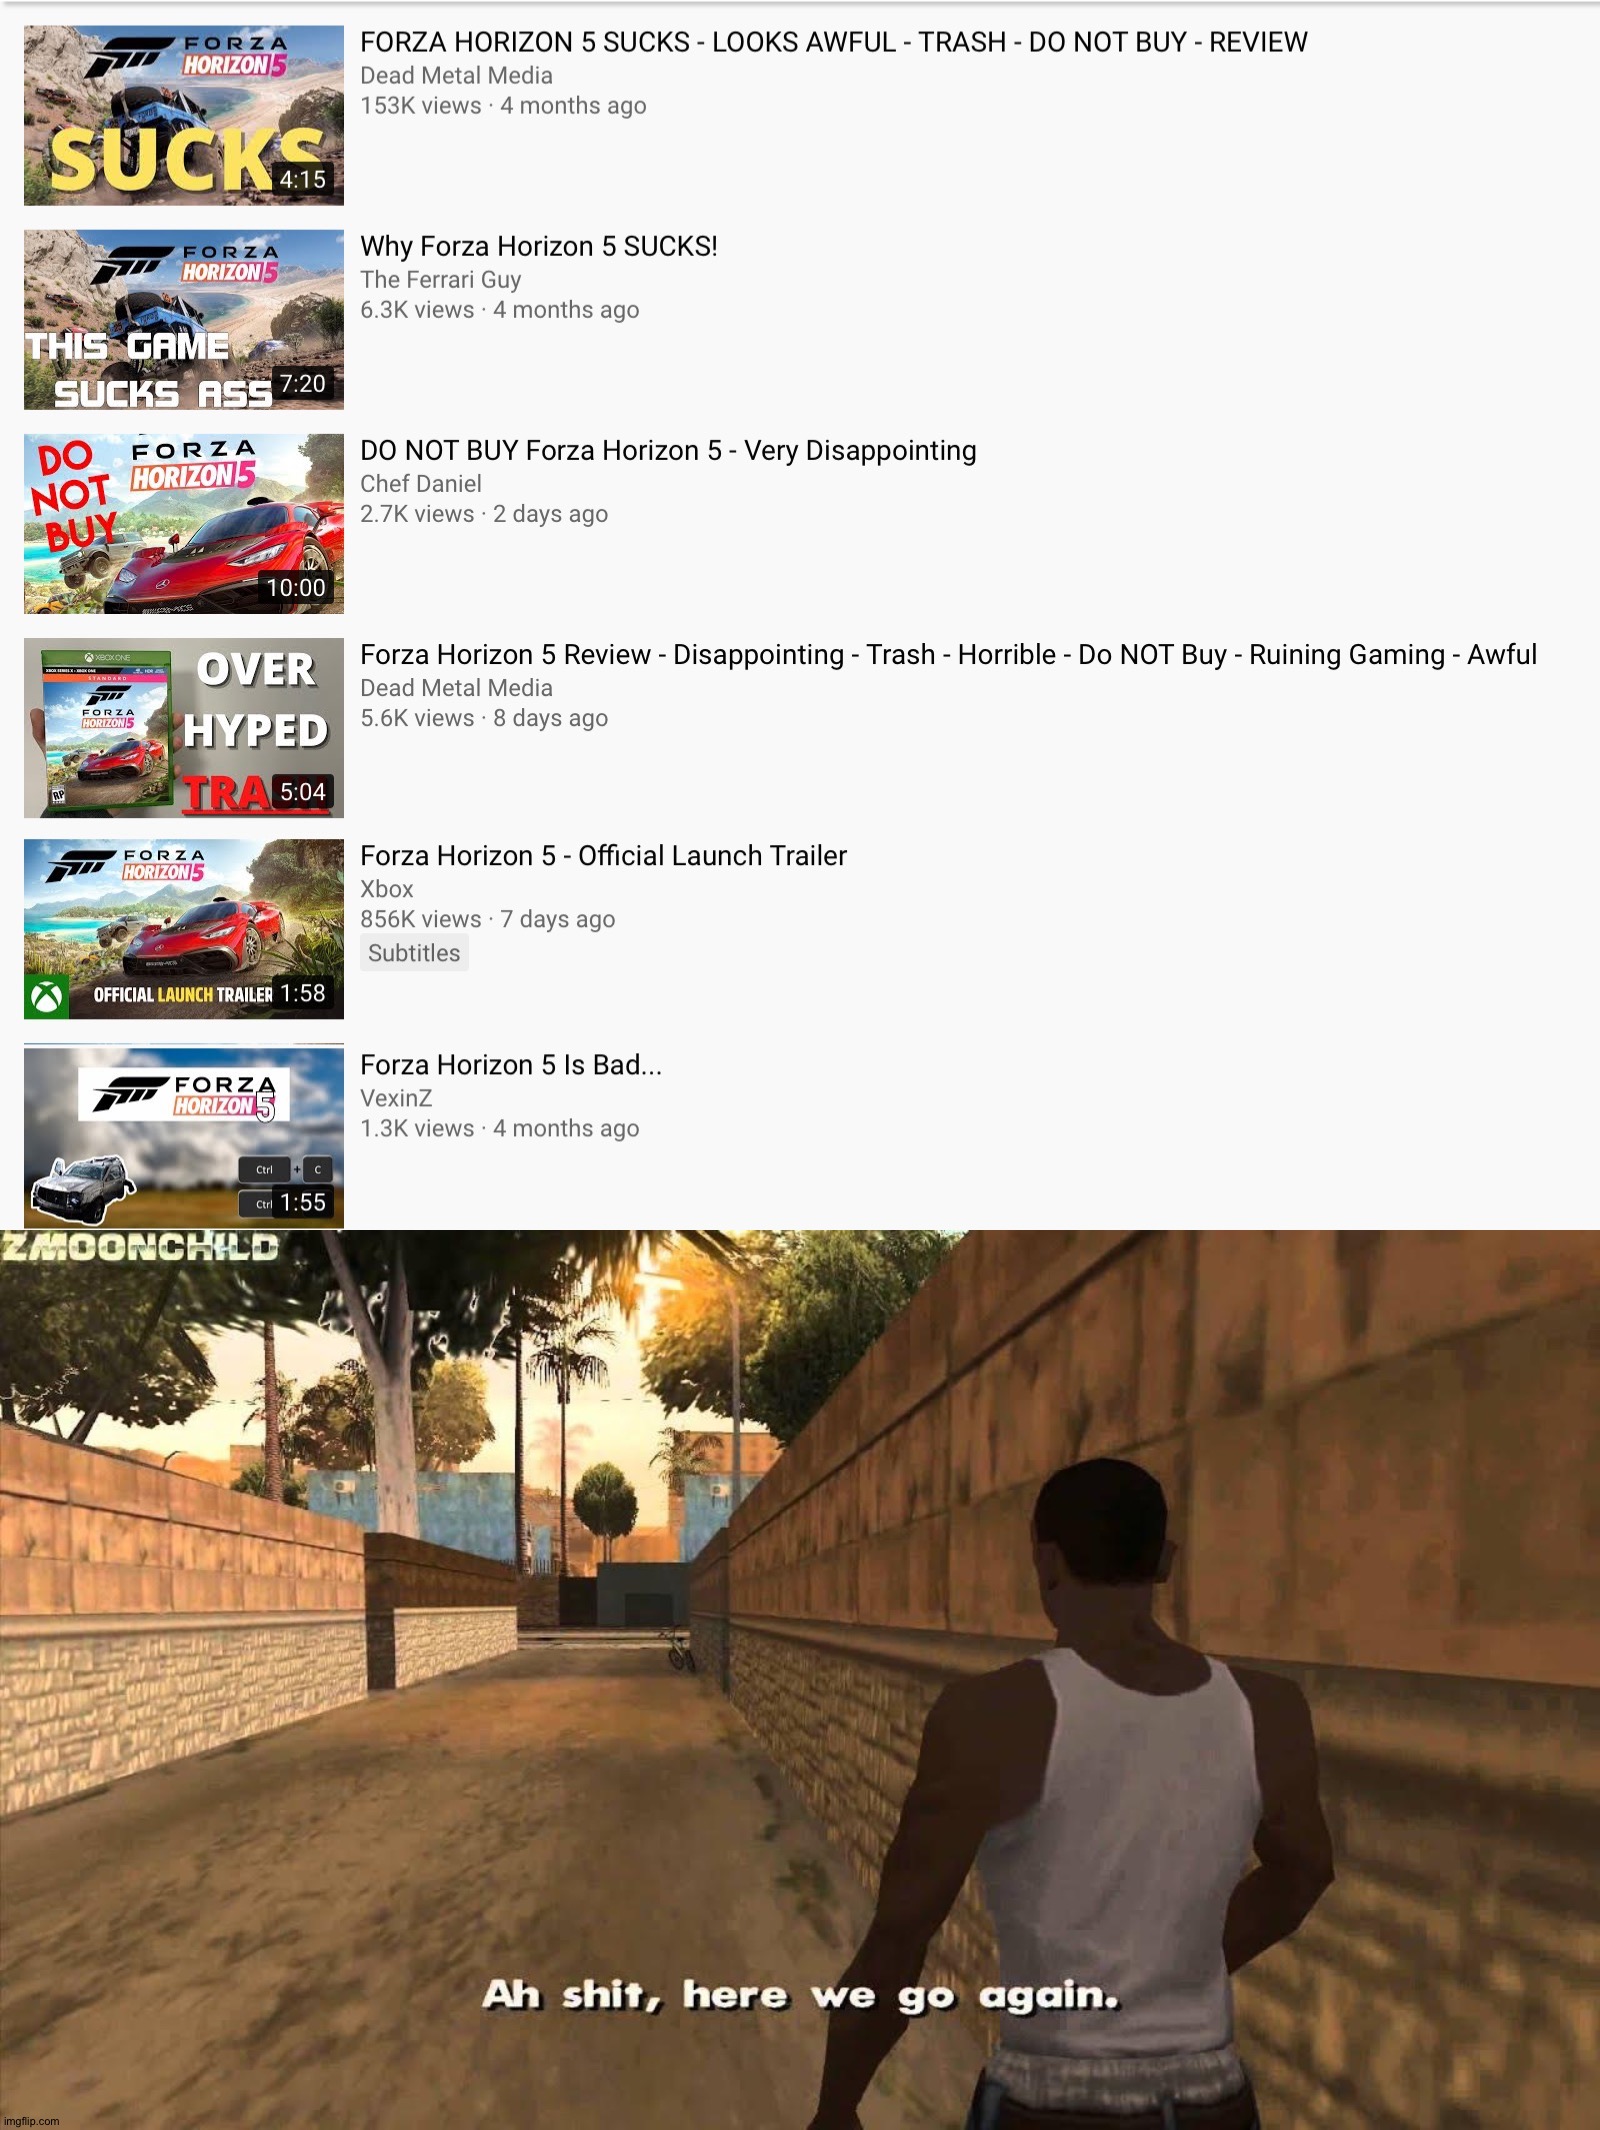 Man. This game got a 10/10 review by IGN and this is becoming one of the most hated racing games... -_- | image tagged in here we go again,memes,funny,forza horizon 5,hate,gaming | made w/ Imgflip meme maker